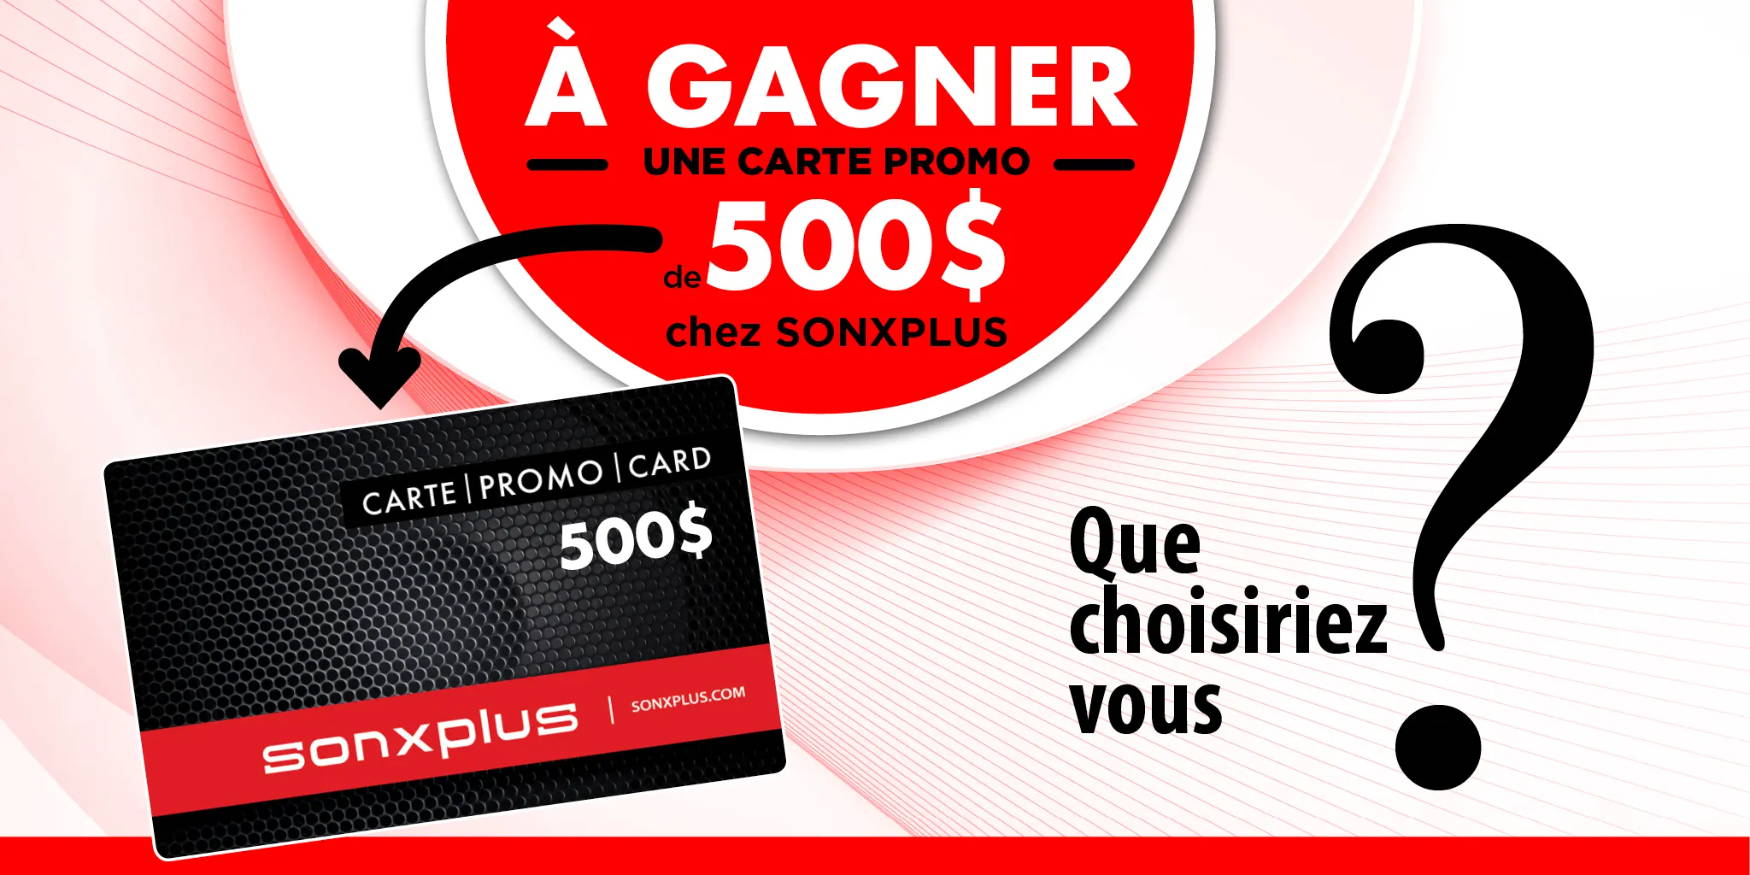 Win a $500 promo card from SONXPLUS